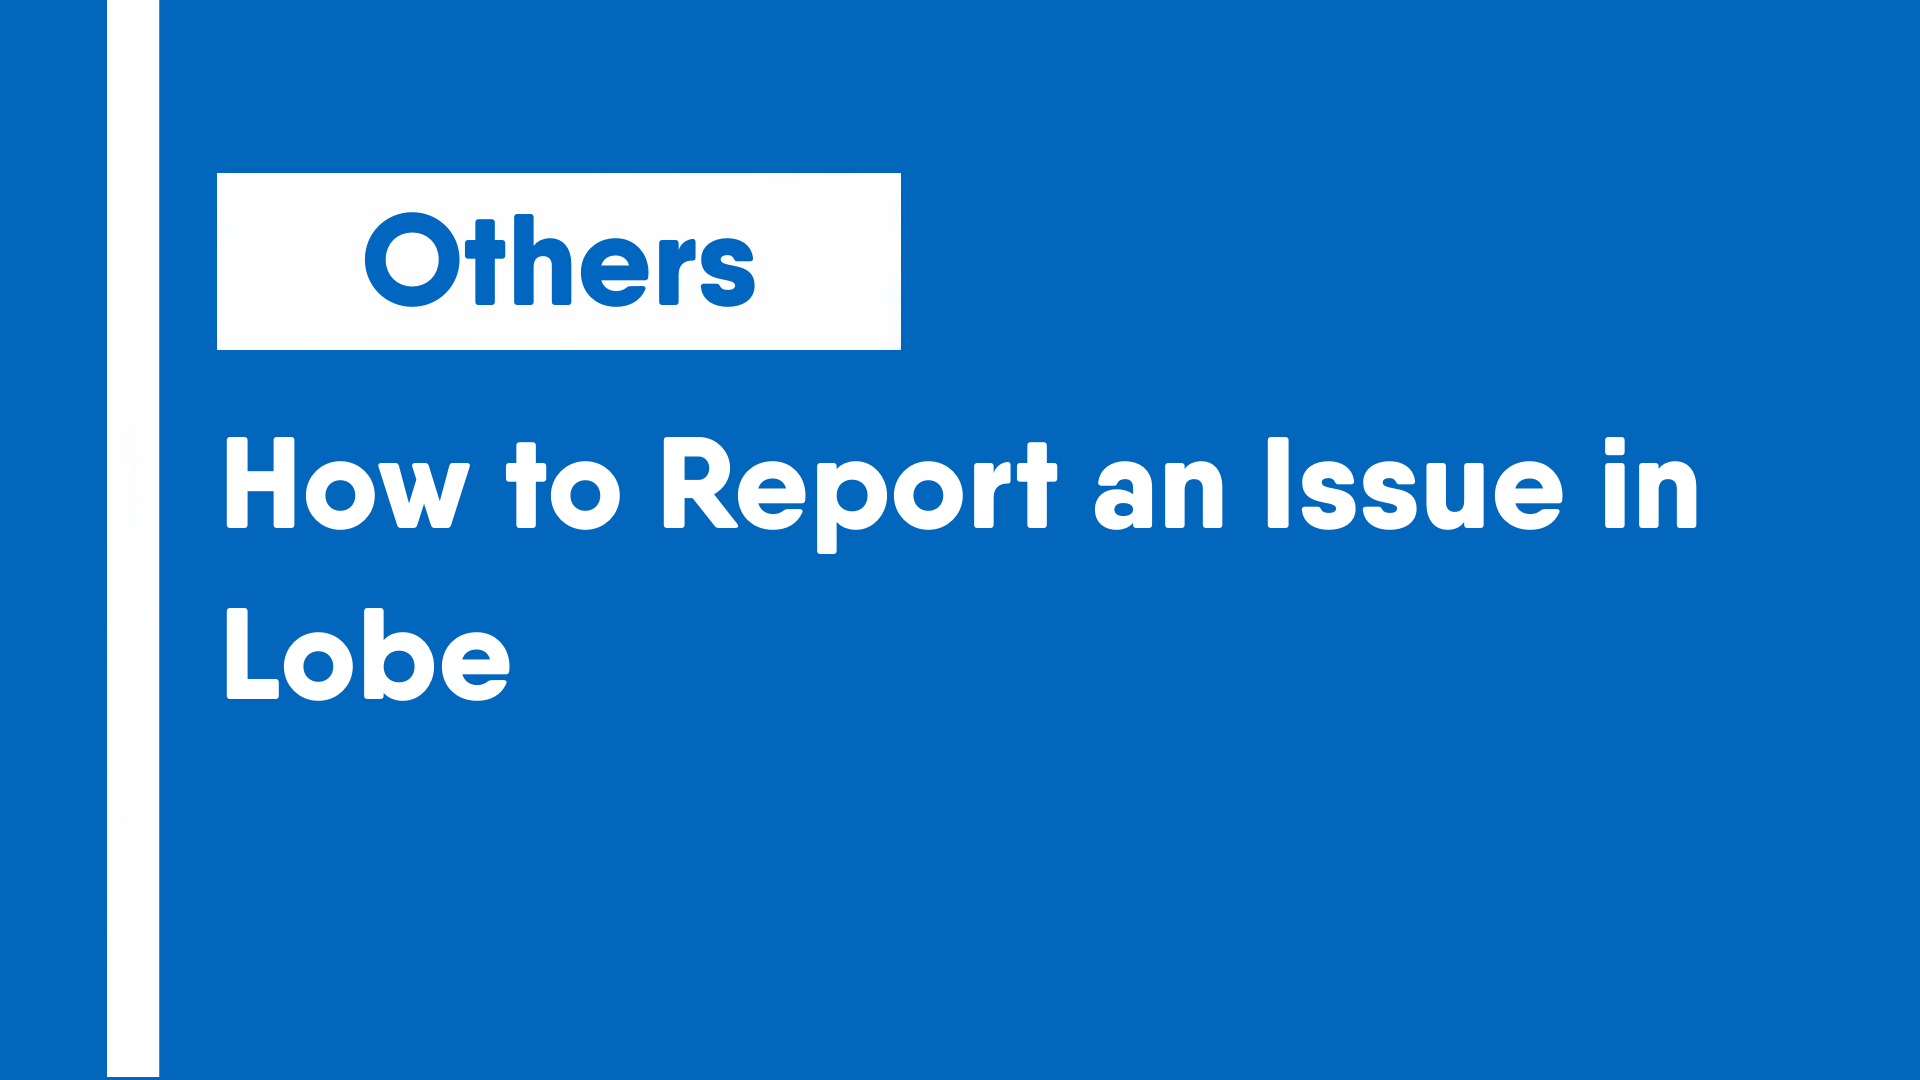 How to Report an Issue in Lobe